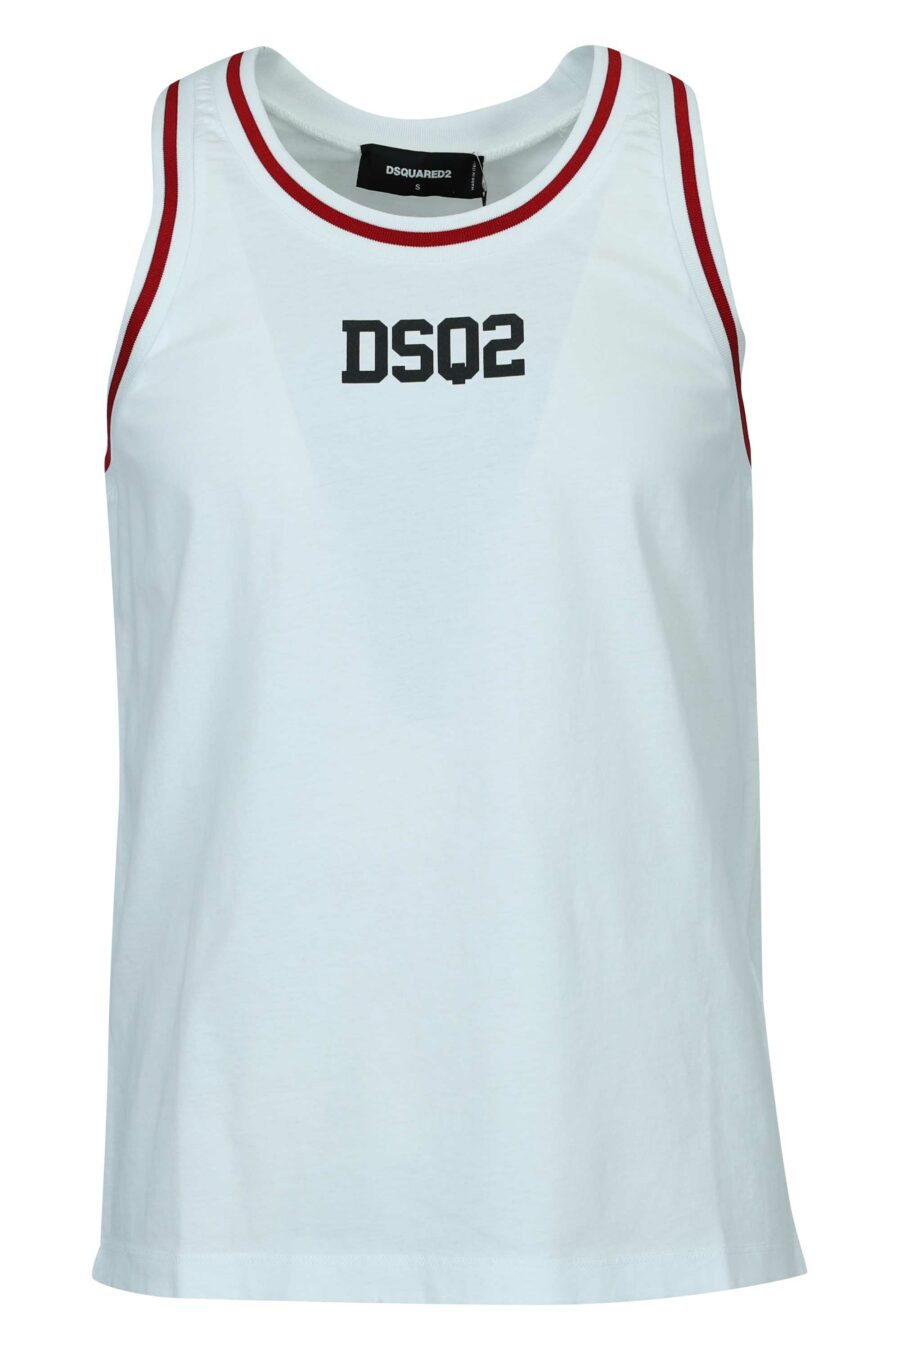 White sleeveless T-shirt with mini logo and red details - 8054148505332